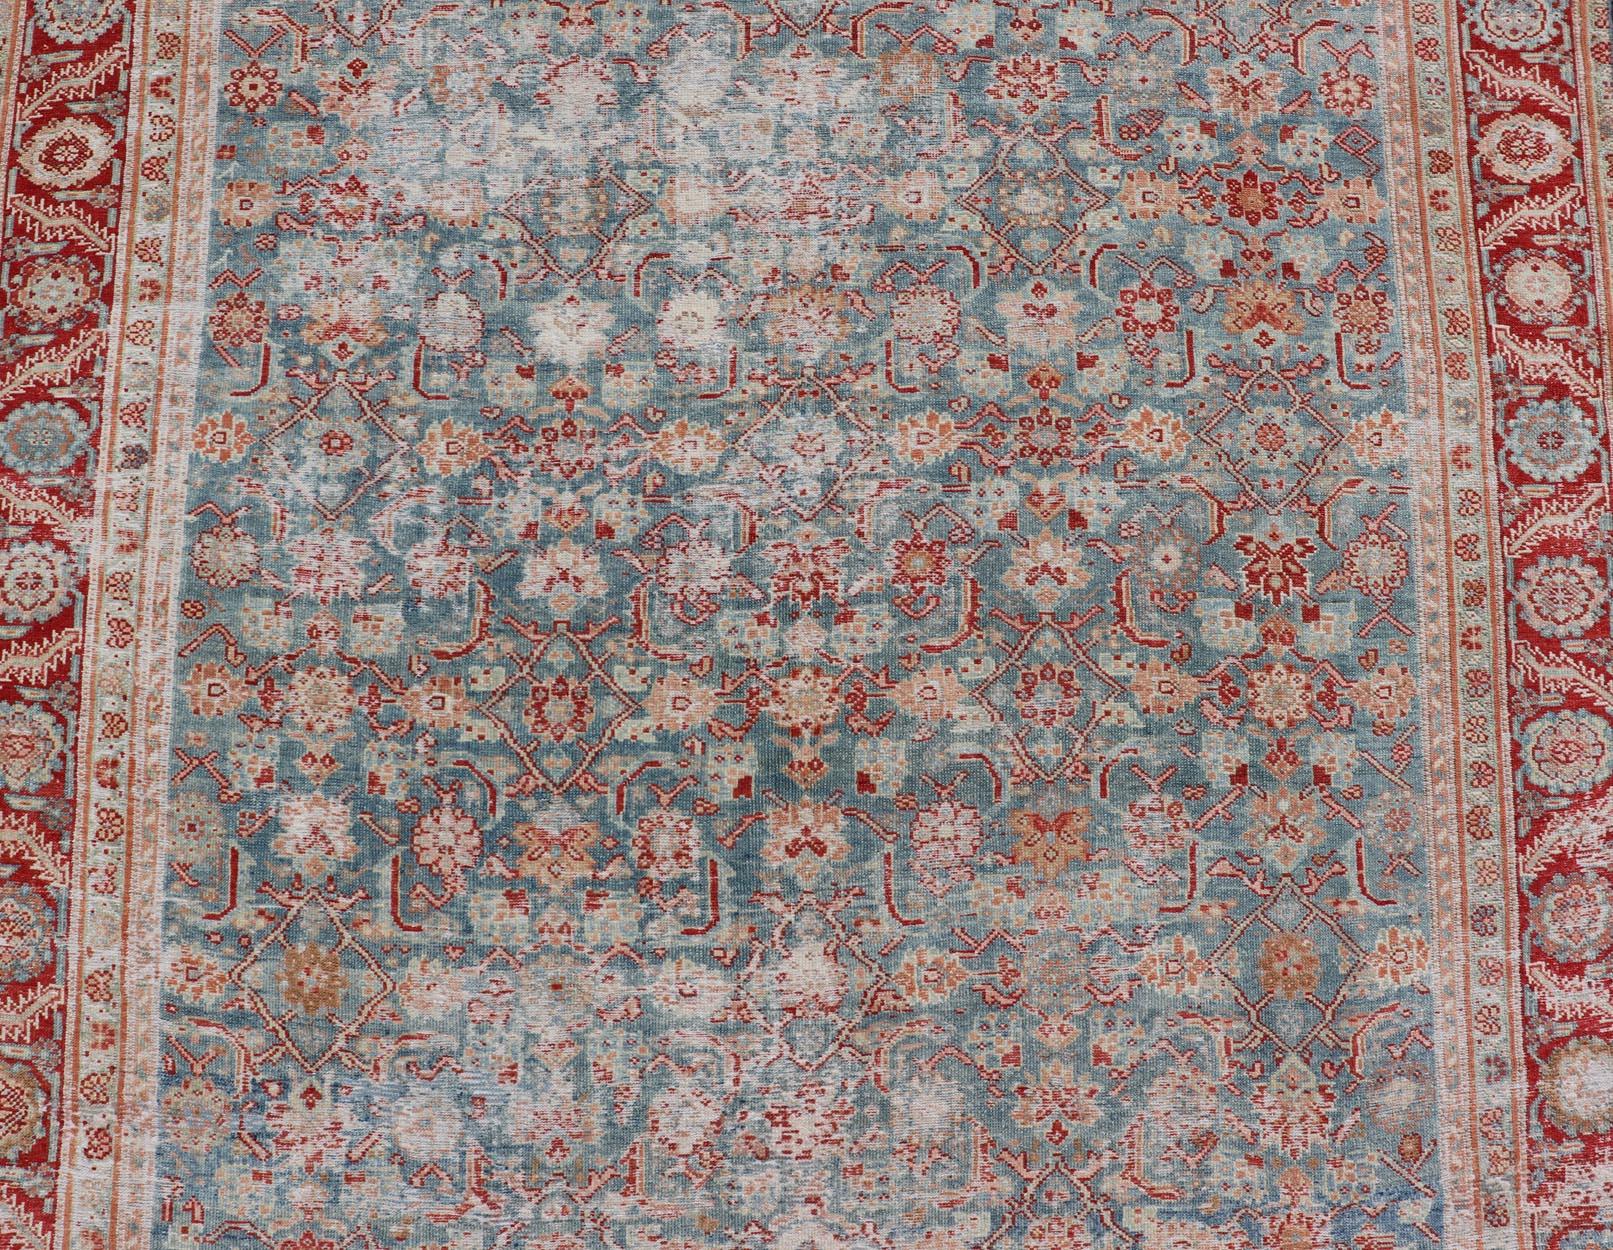 Antique Persian Malayer Gallery Rug with All over Design in Blue's and Red For Sale 4